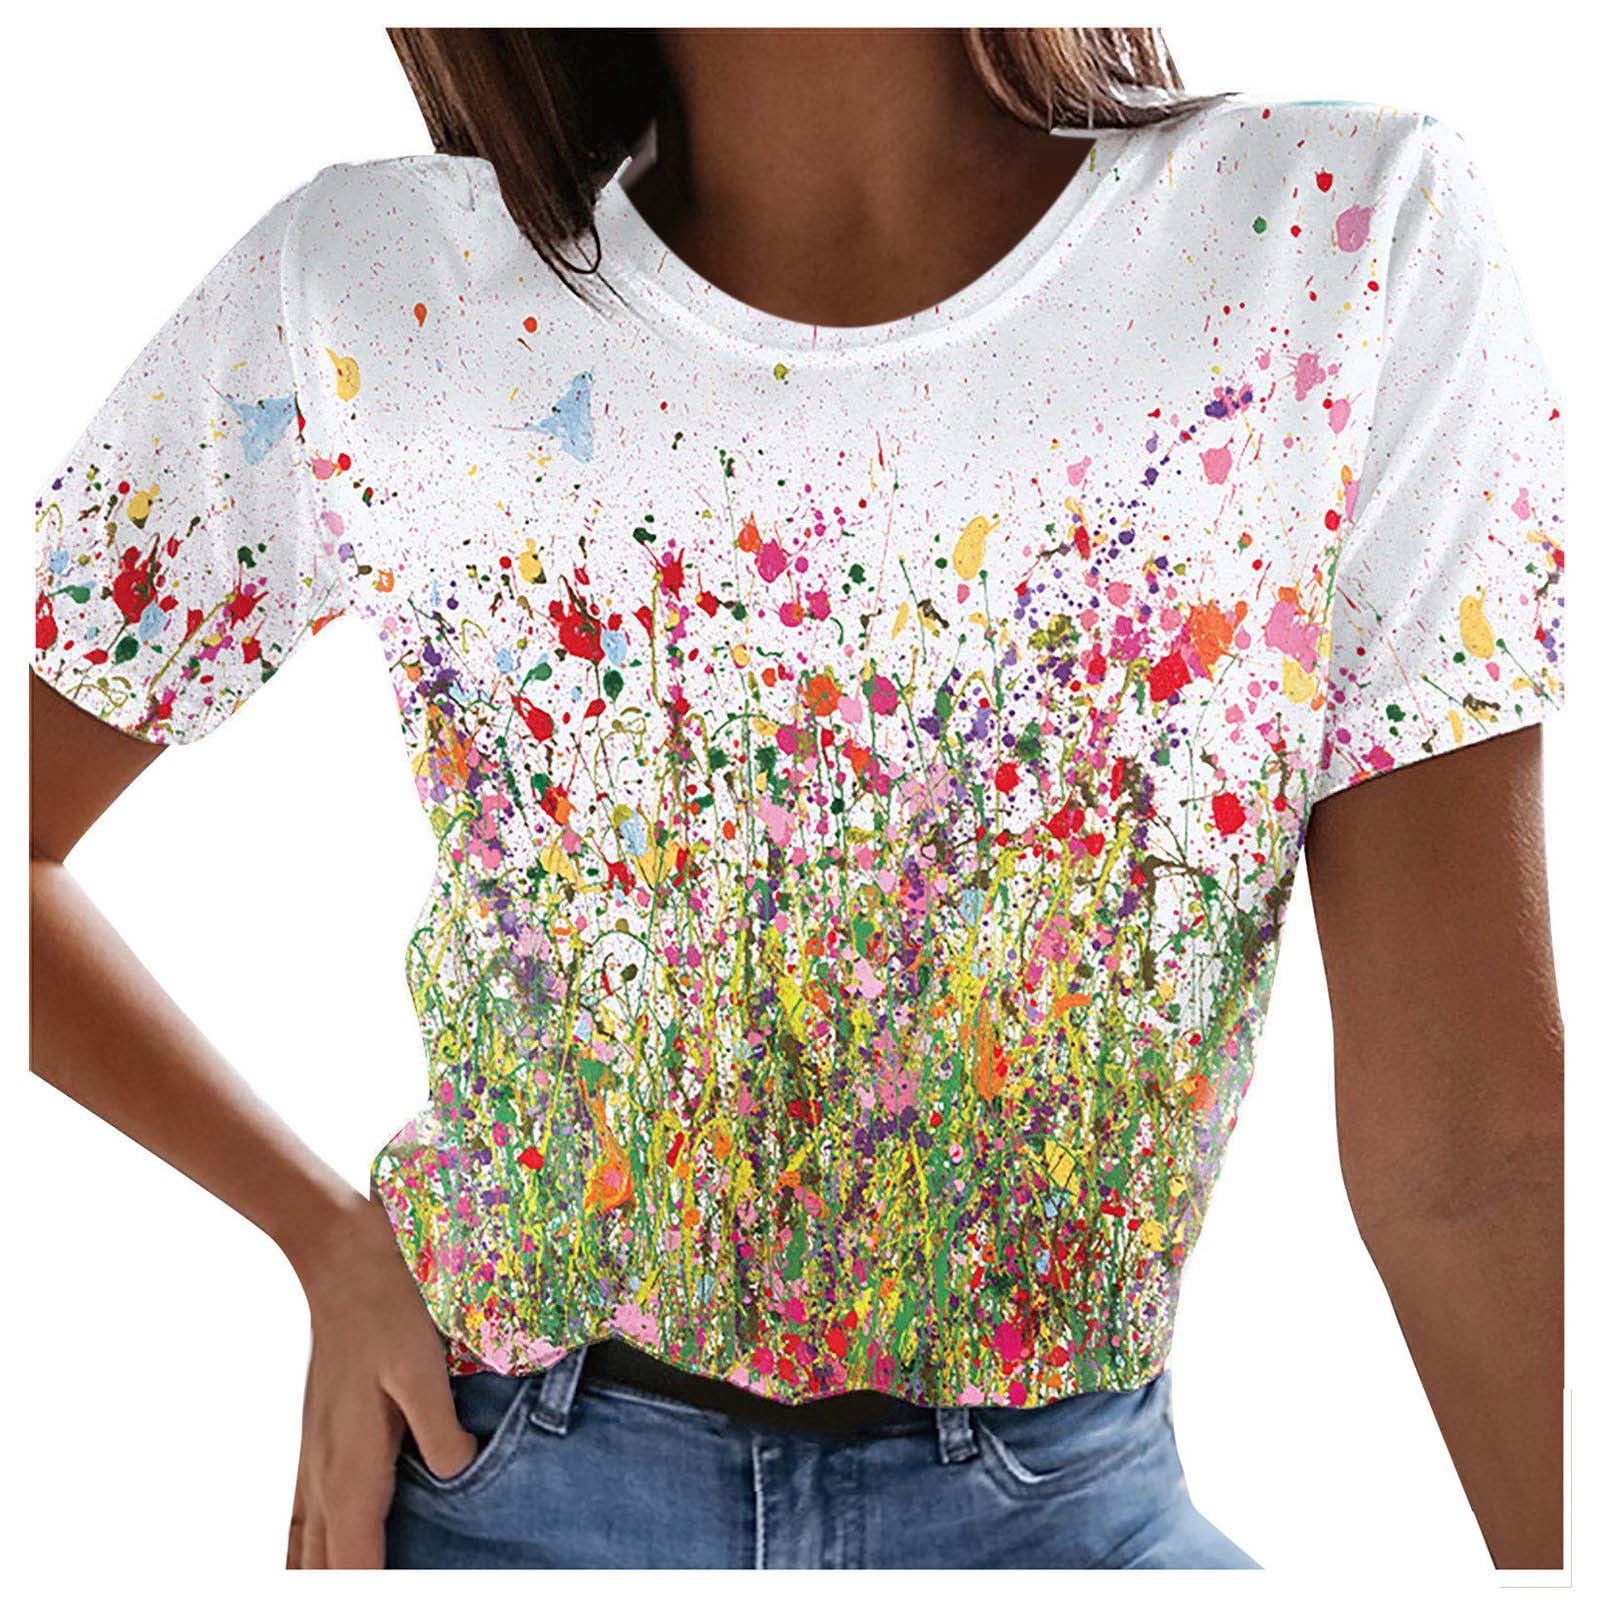 Cute Graphic Tee Shirts for Womens Summer Floral Flower Tops Short ...